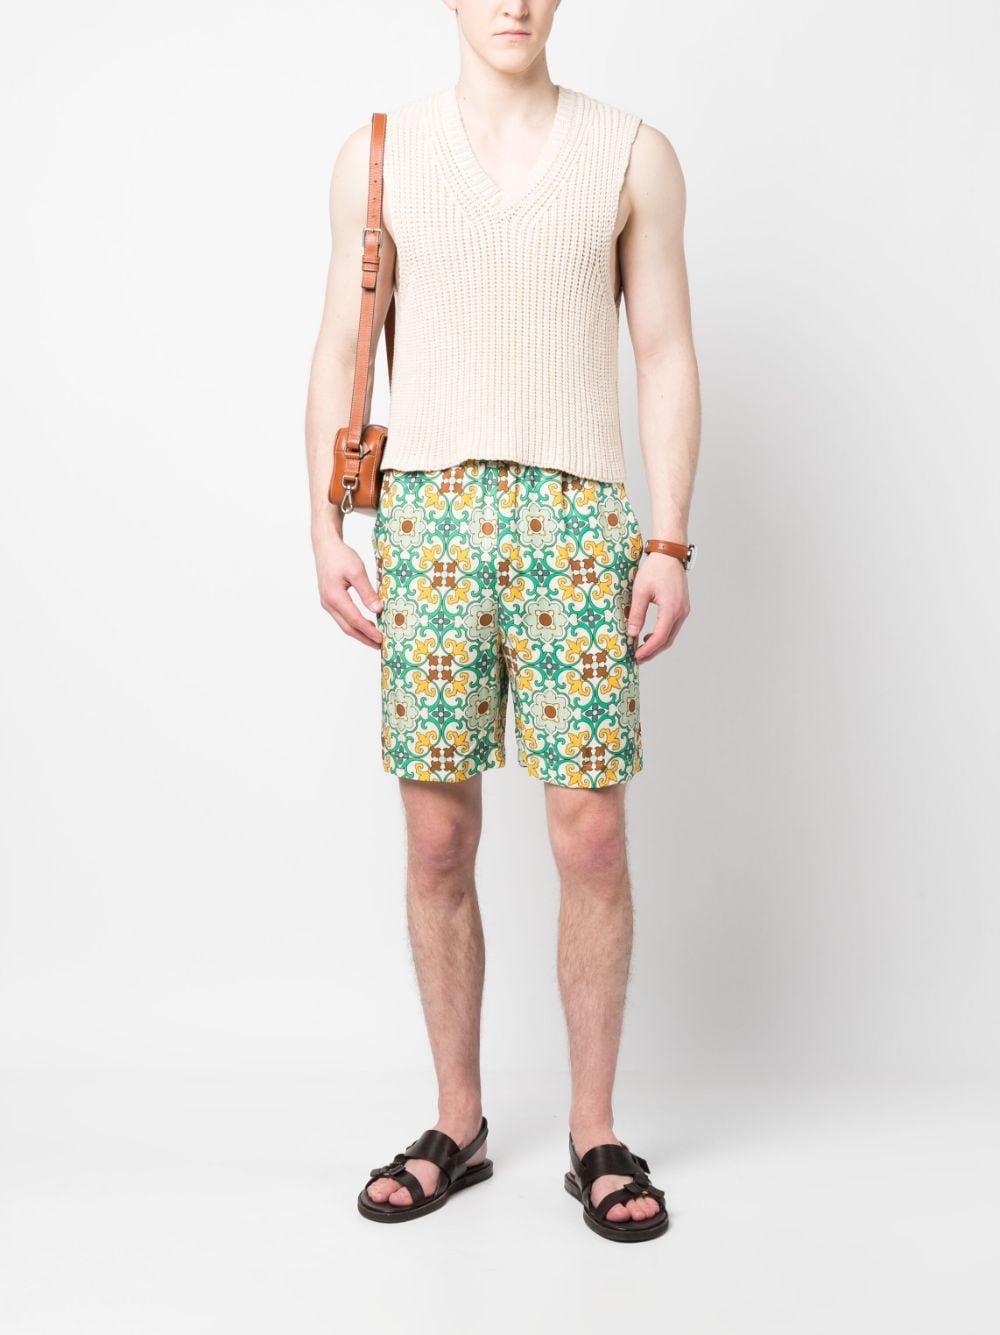 All-over graphic-print shorts